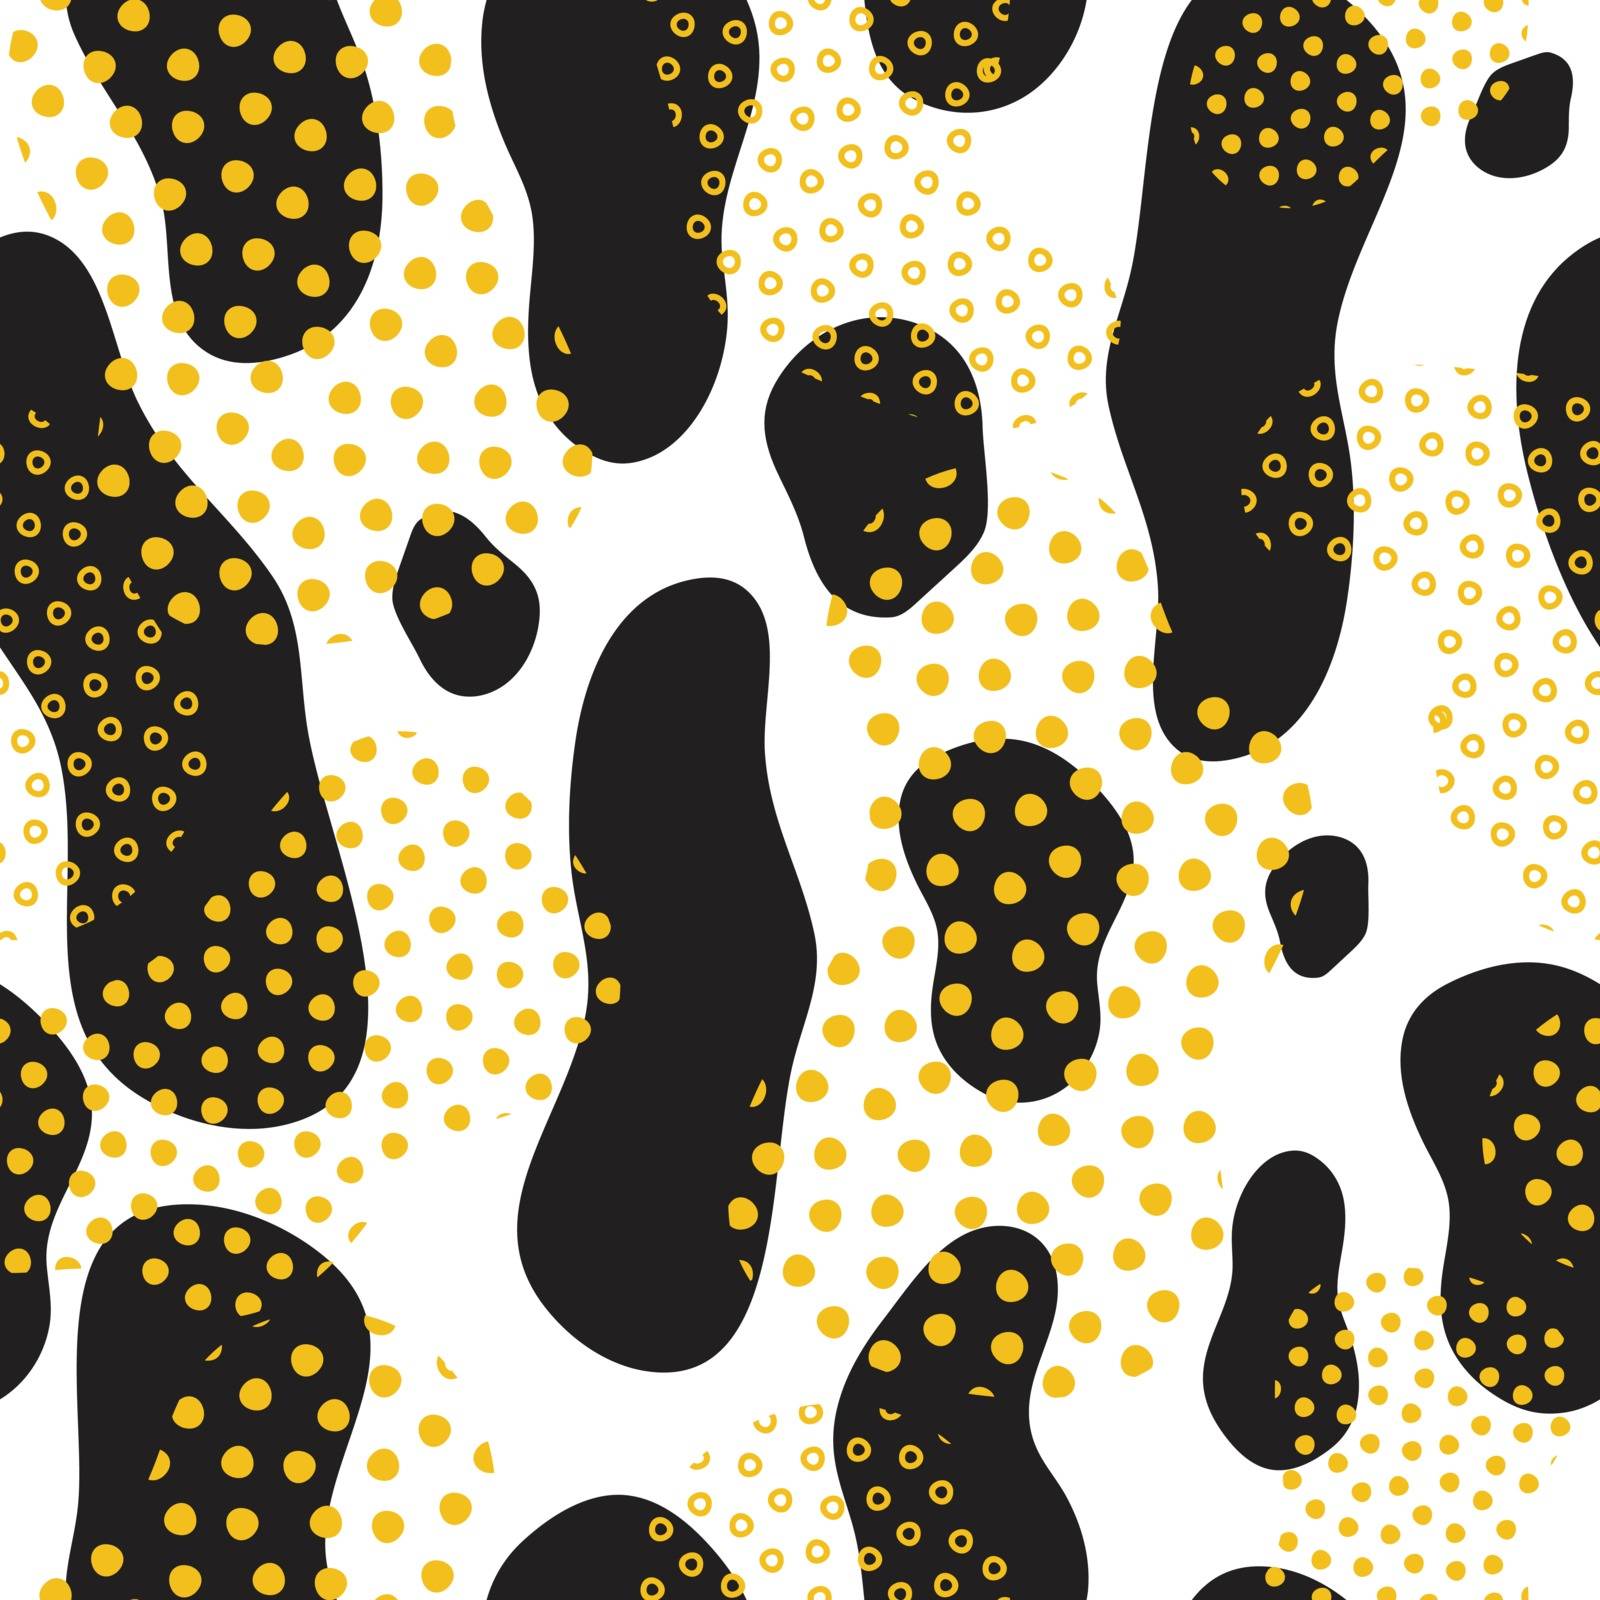 Camouflage Abstract Seamless Pattern by CreatorsClub